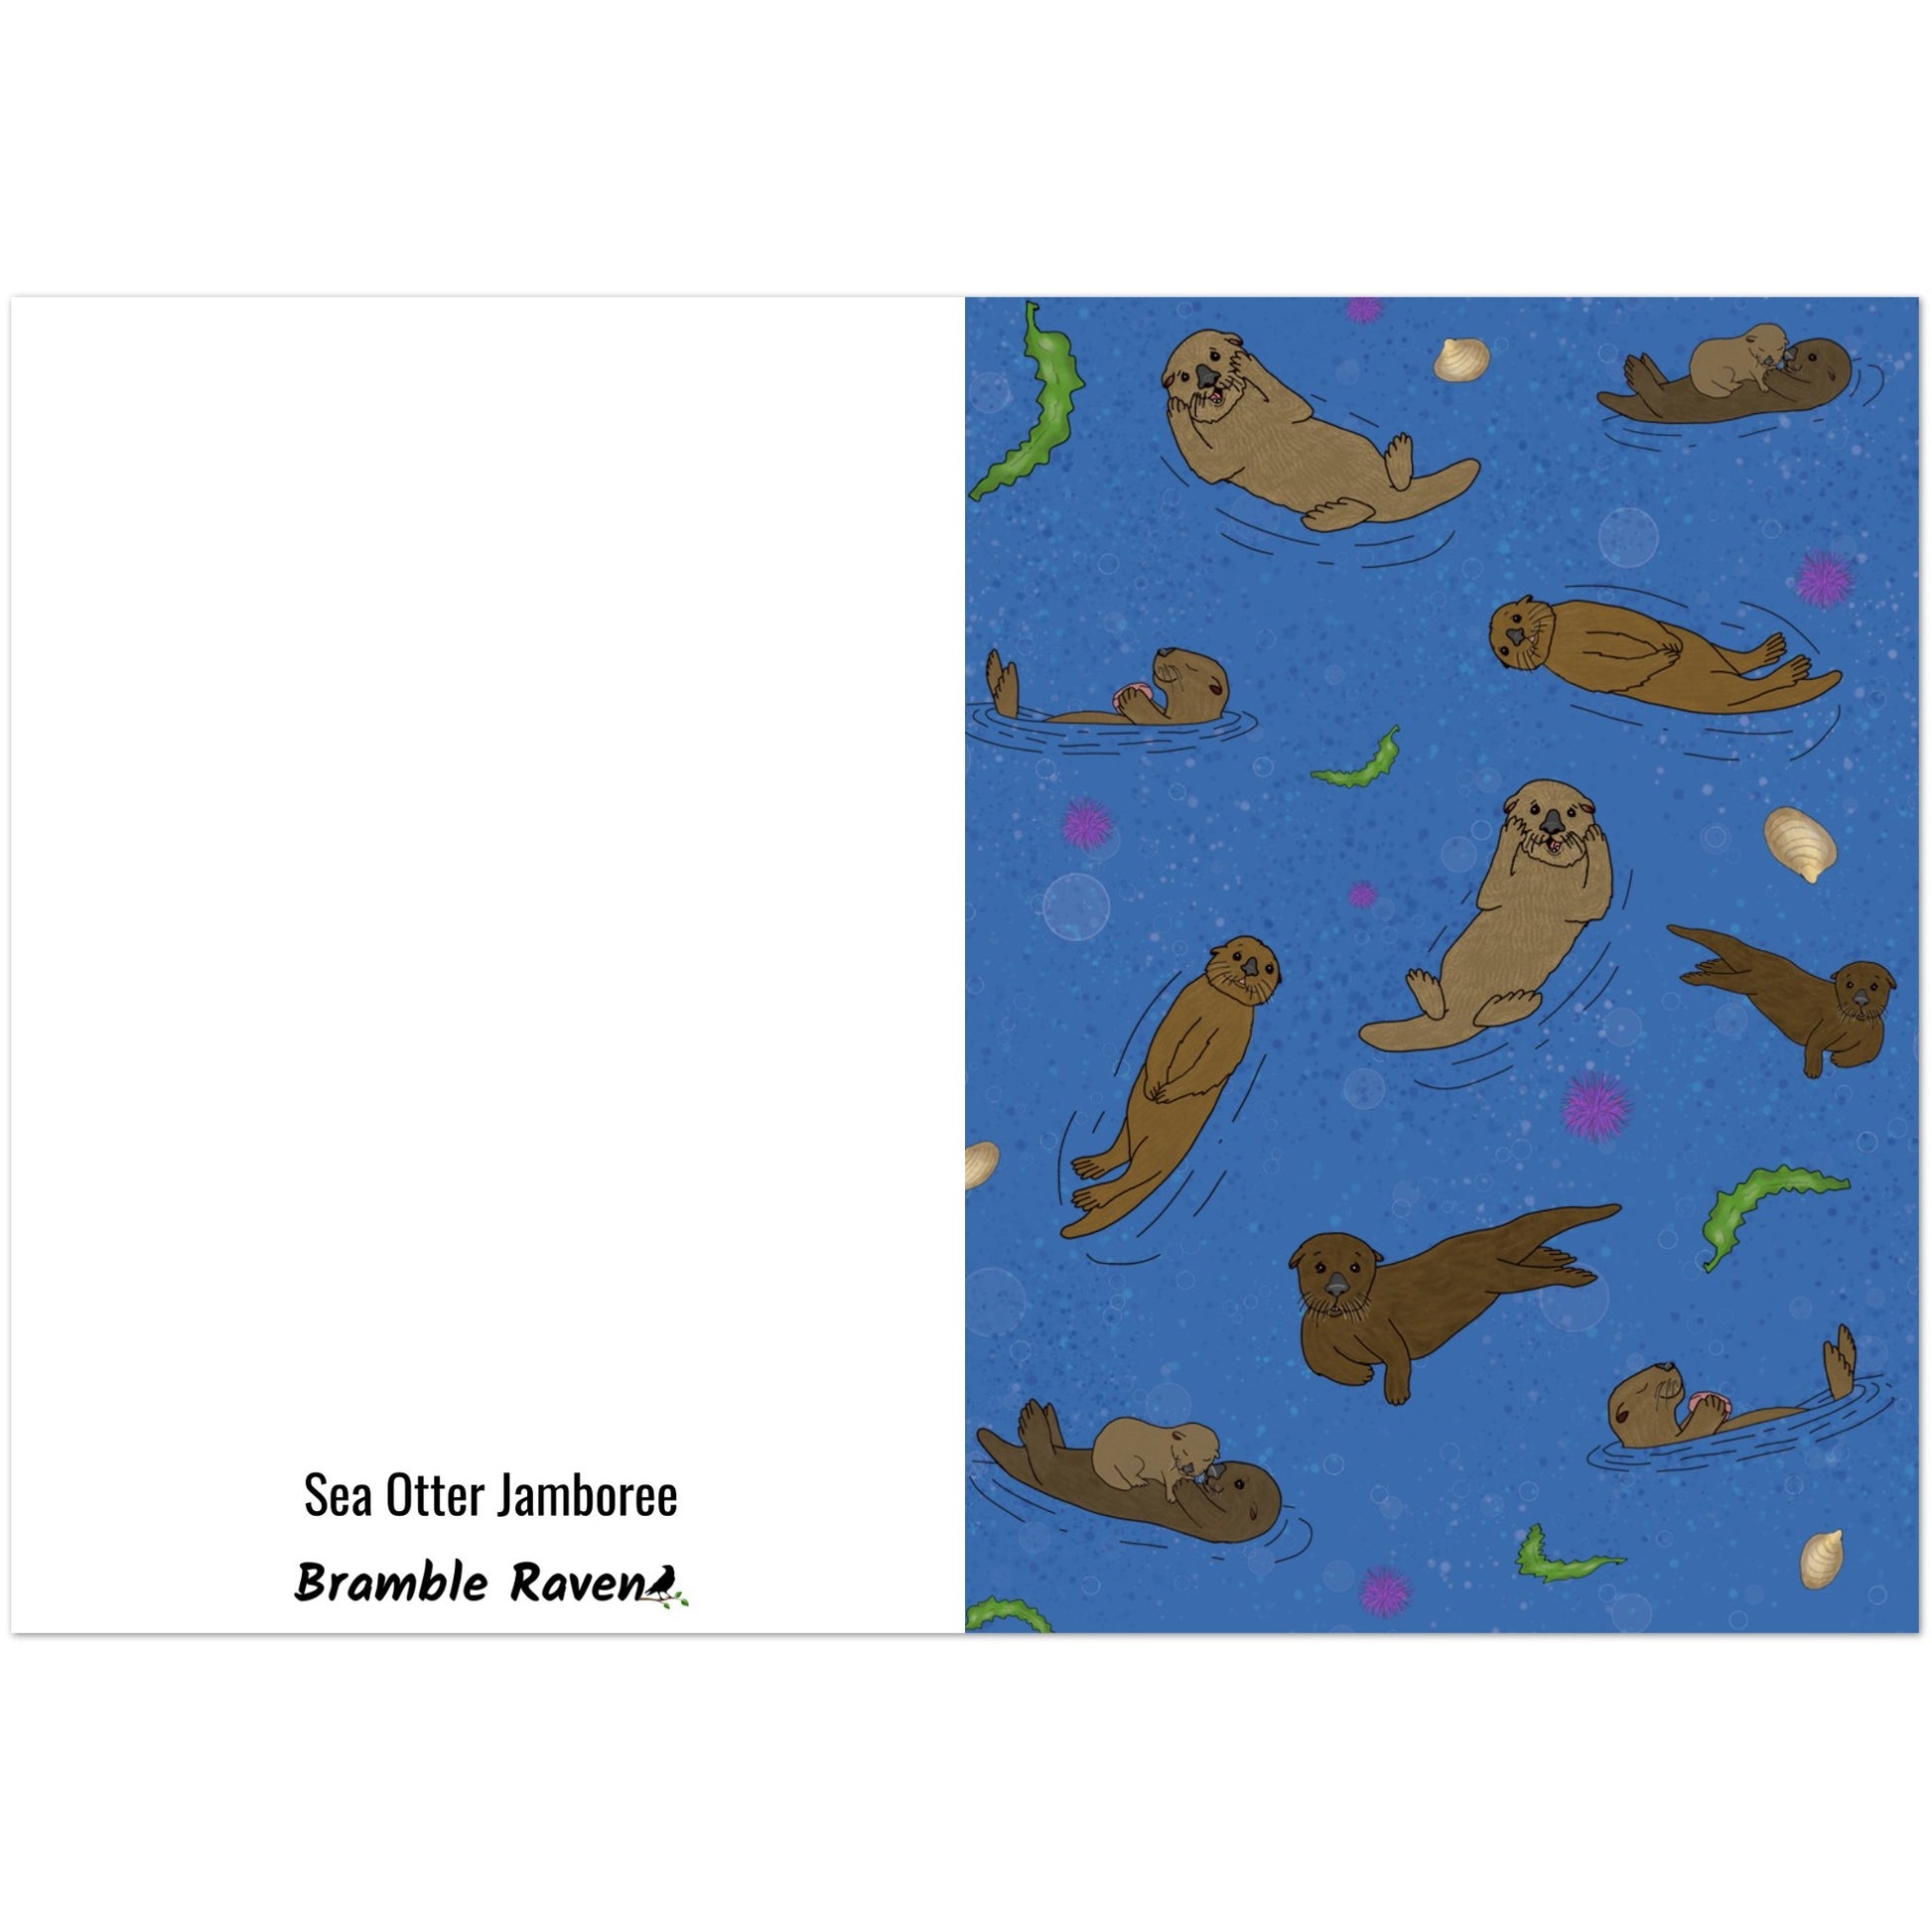 Pack of ten 5.5 x 8.5 inch greeting cards. Features illustrated sea otters on the front. Inside is blank. Made of coated paperboard. Comes with envelopes.